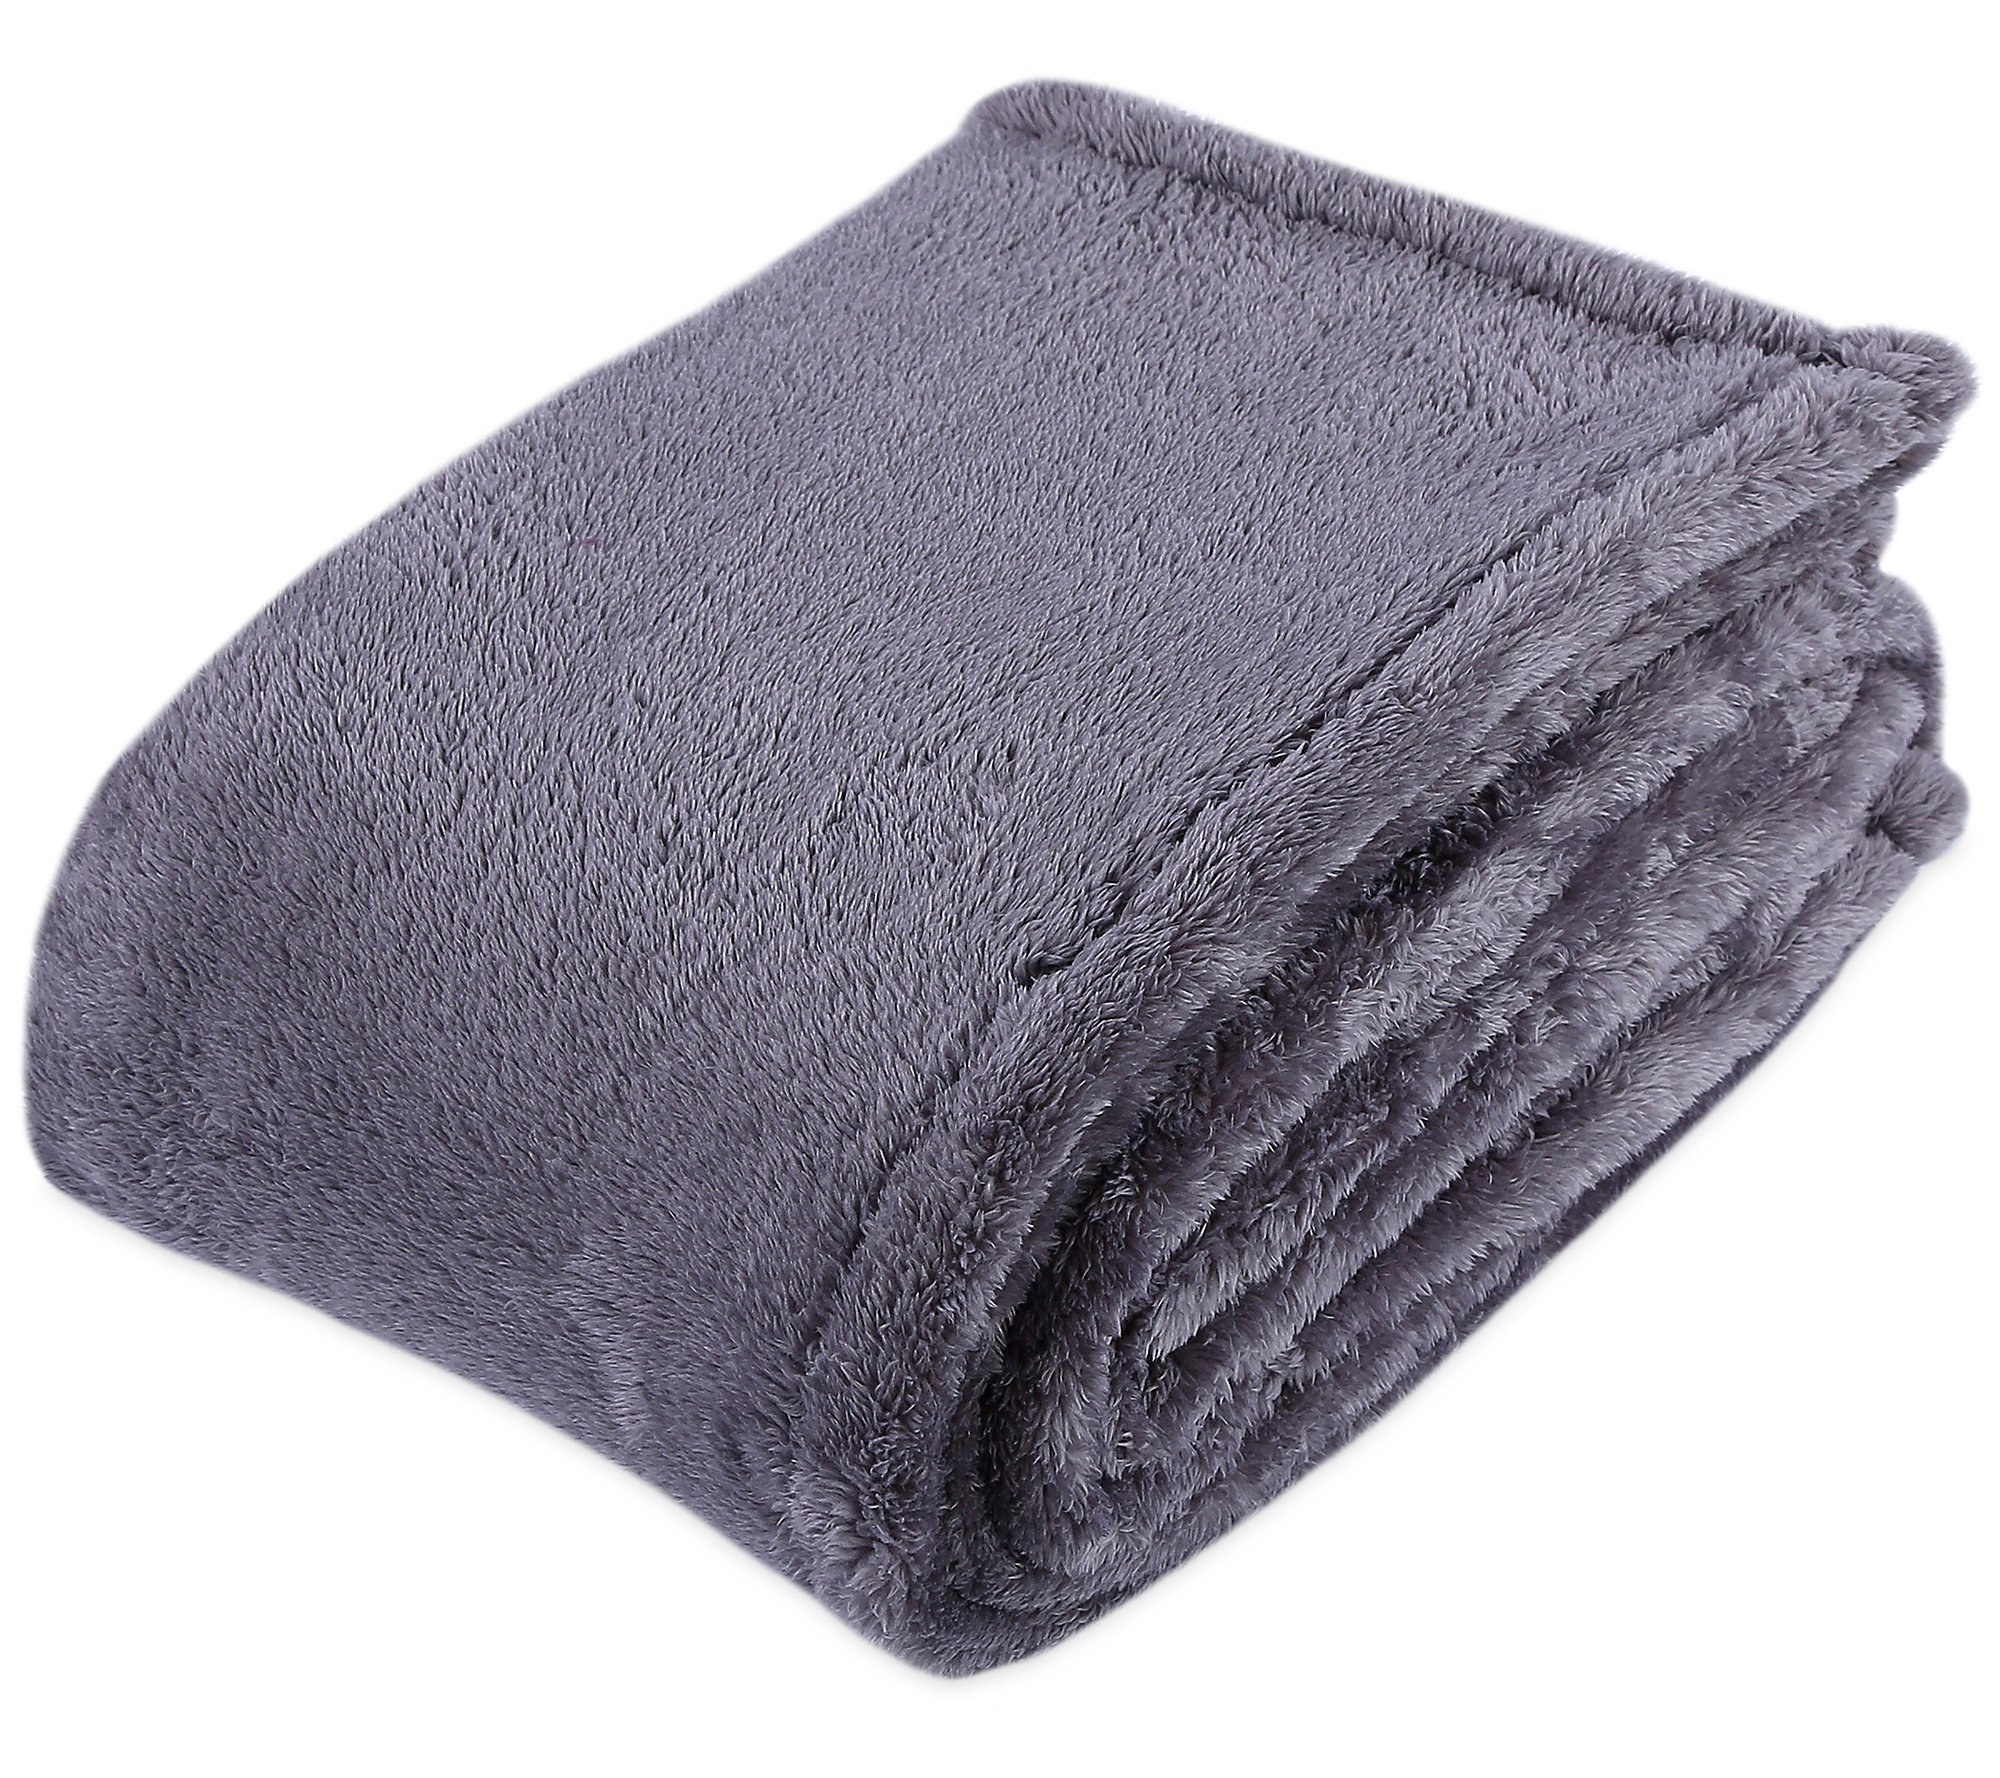 Shop Berkshire Blanket Extra-Fluffy Throw from QVC on Openhaus